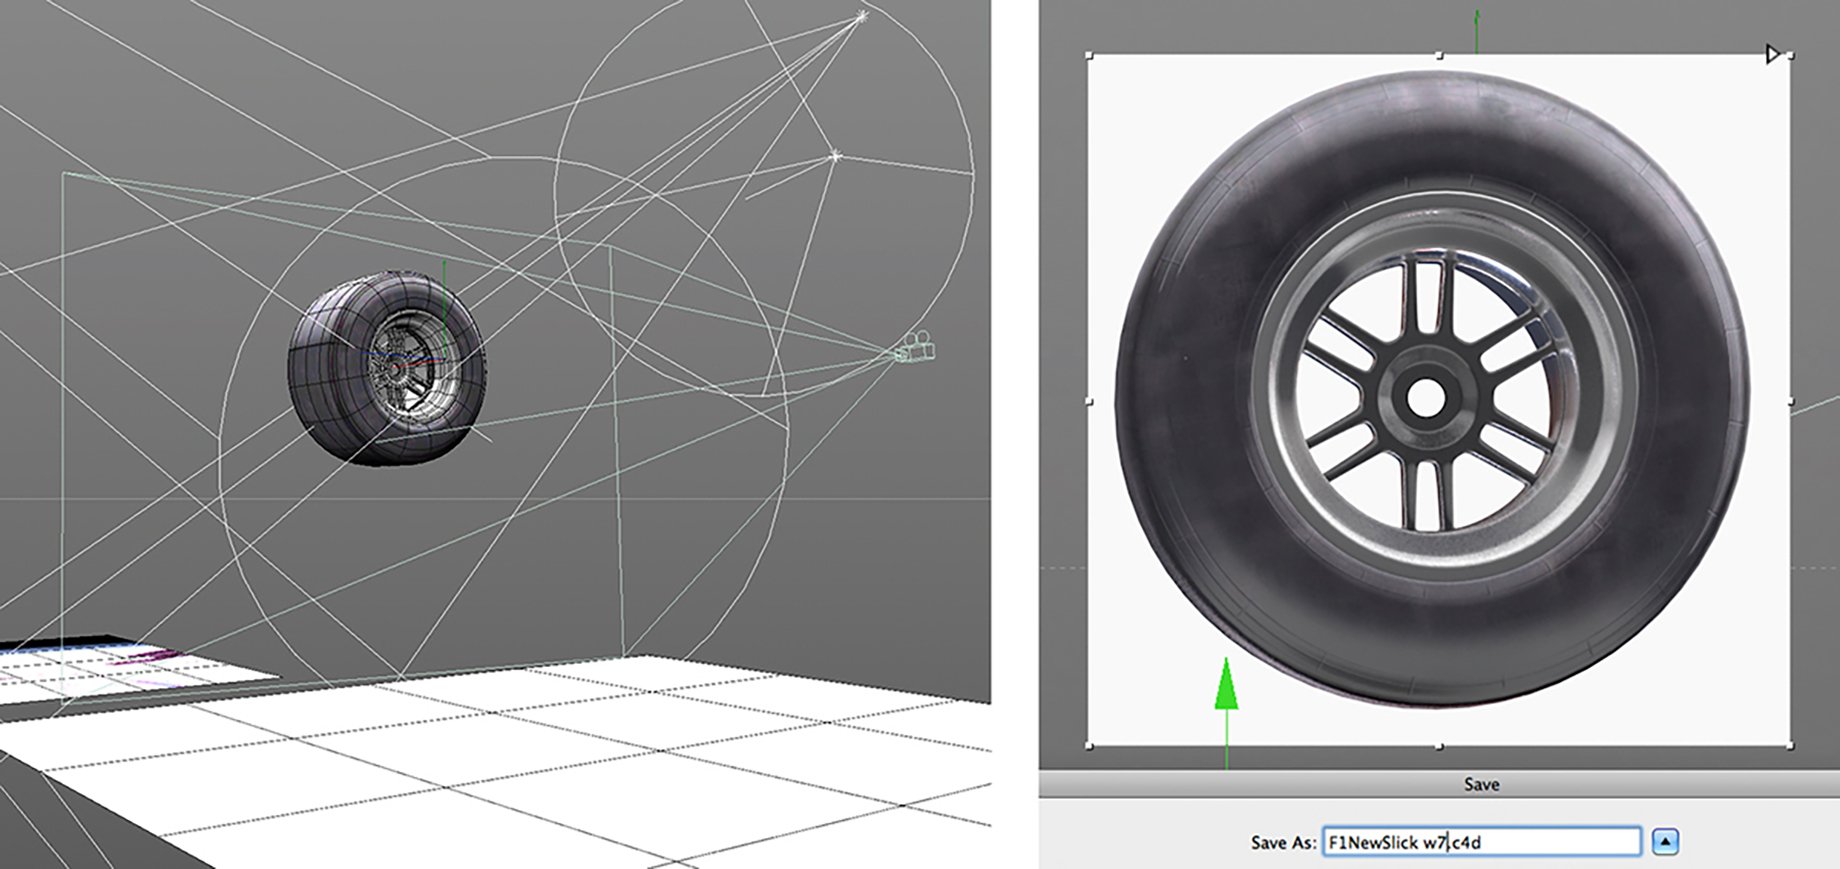 3D rendered image of Formula 1 tires created by John Fulton for HondaJet Wings campaign.